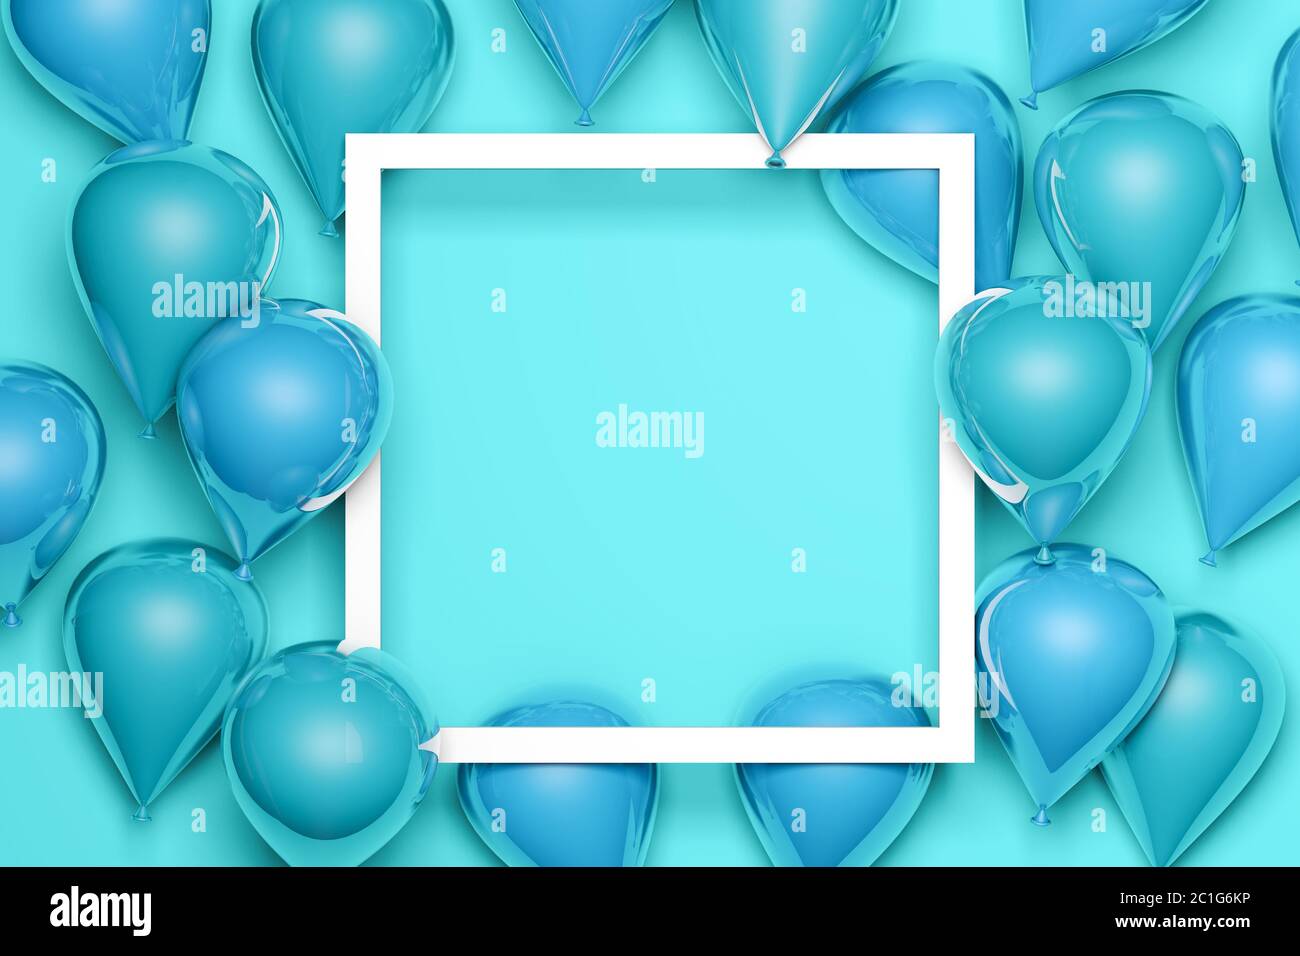 special offer celebrate background with blue air balloons Stock Photo